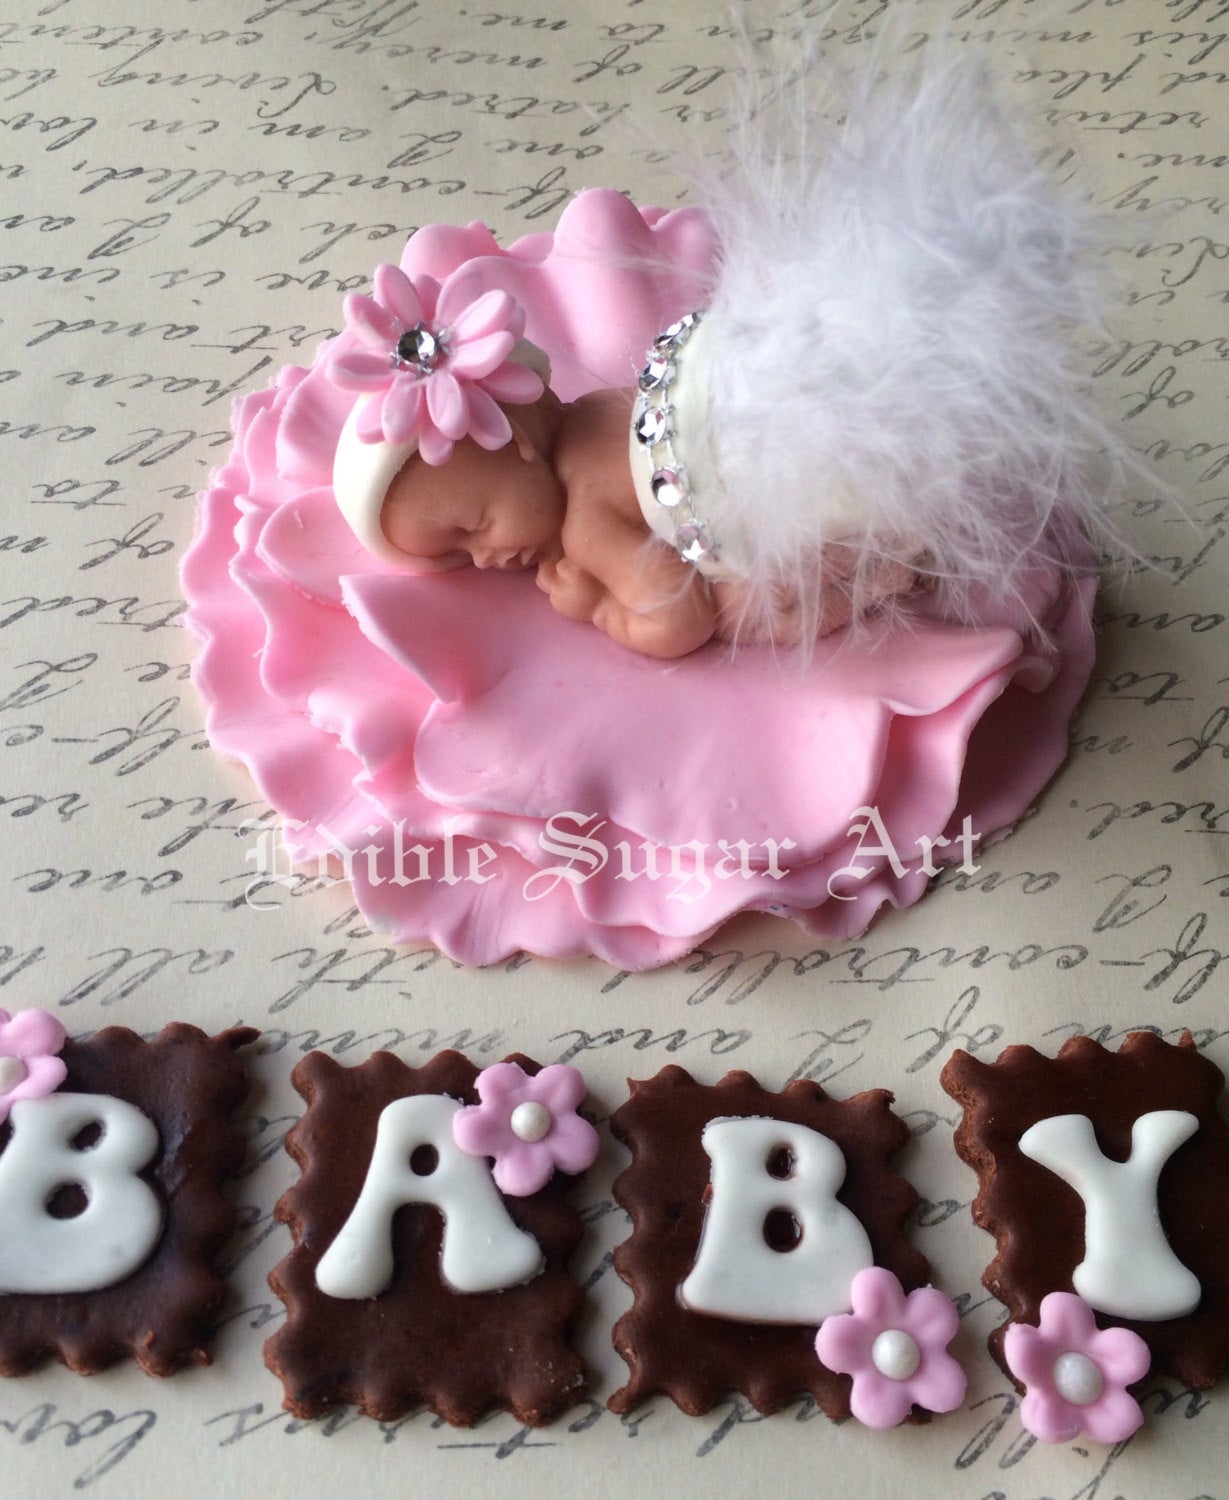 Fondant Baby Shower Cake Topper with Blocks, Letters in Hearts